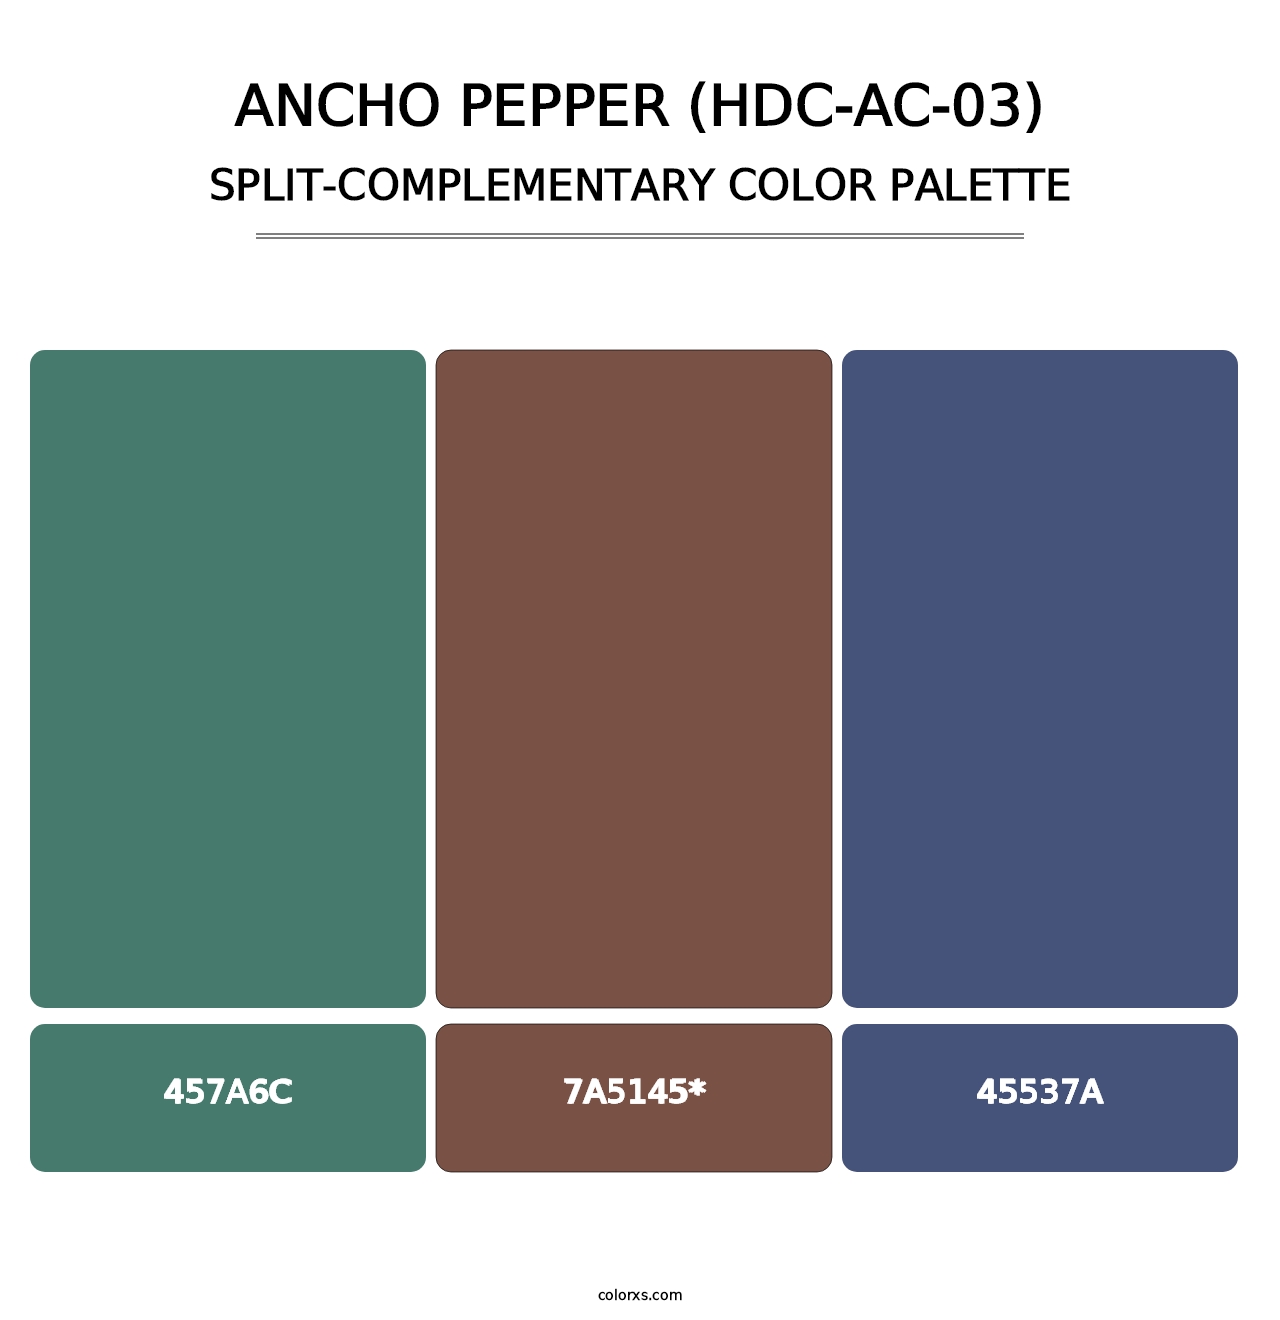 Ancho Pepper (HDC-AC-03) - Split-Complementary Color Palette